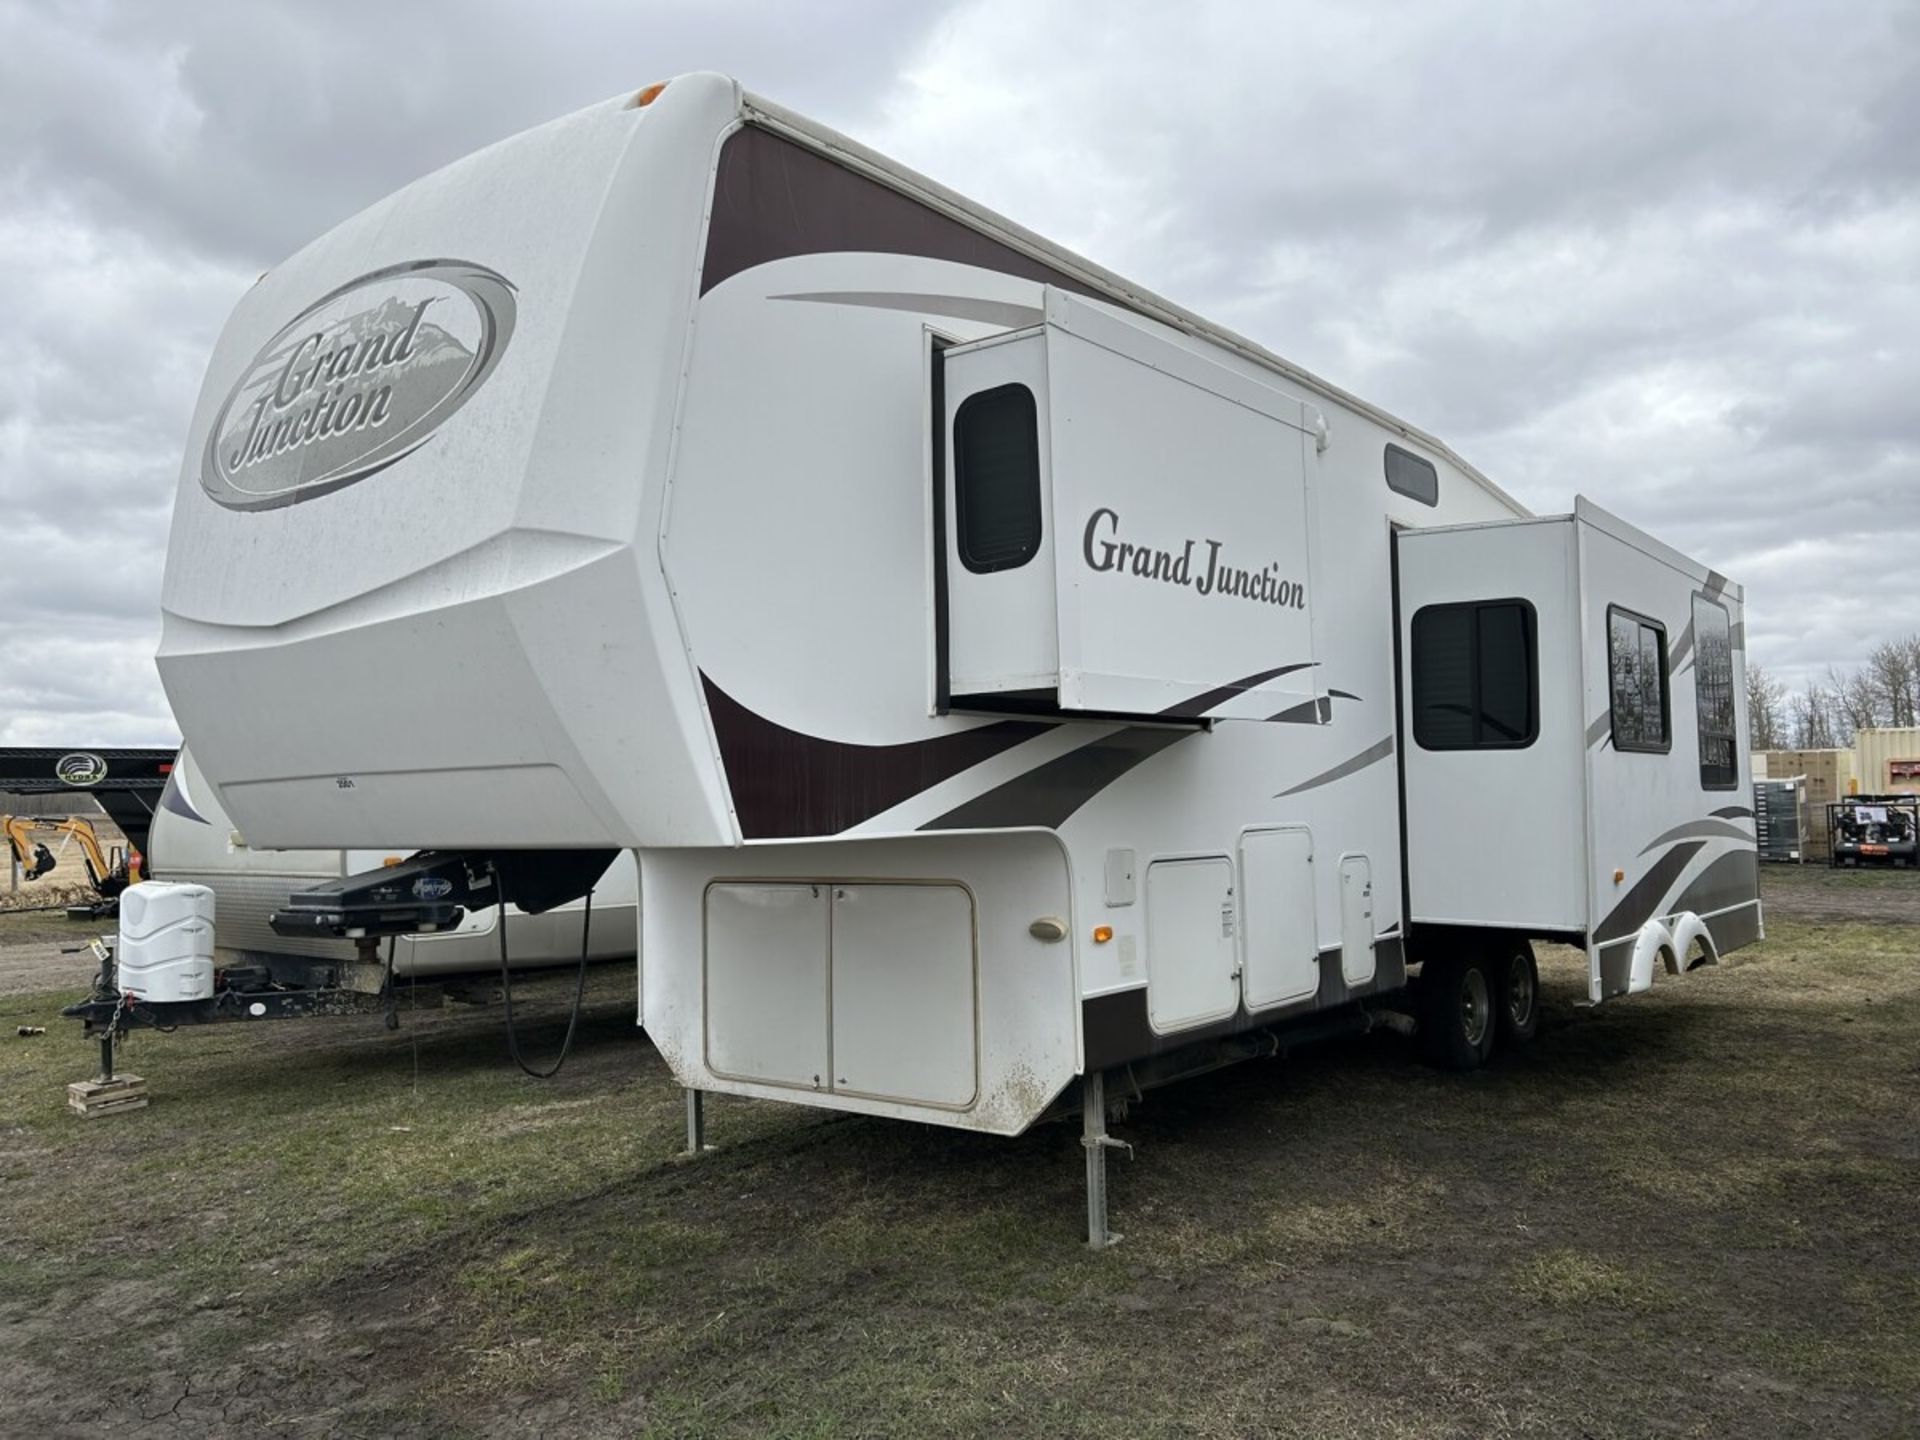 2007 GRAND JUNCTION 29DRK BY DUTCHMEN - DOUBLE SLIDE, AWNING, AC, REAR KITCHEN, FRONT QUEEN - Image 2 of 16